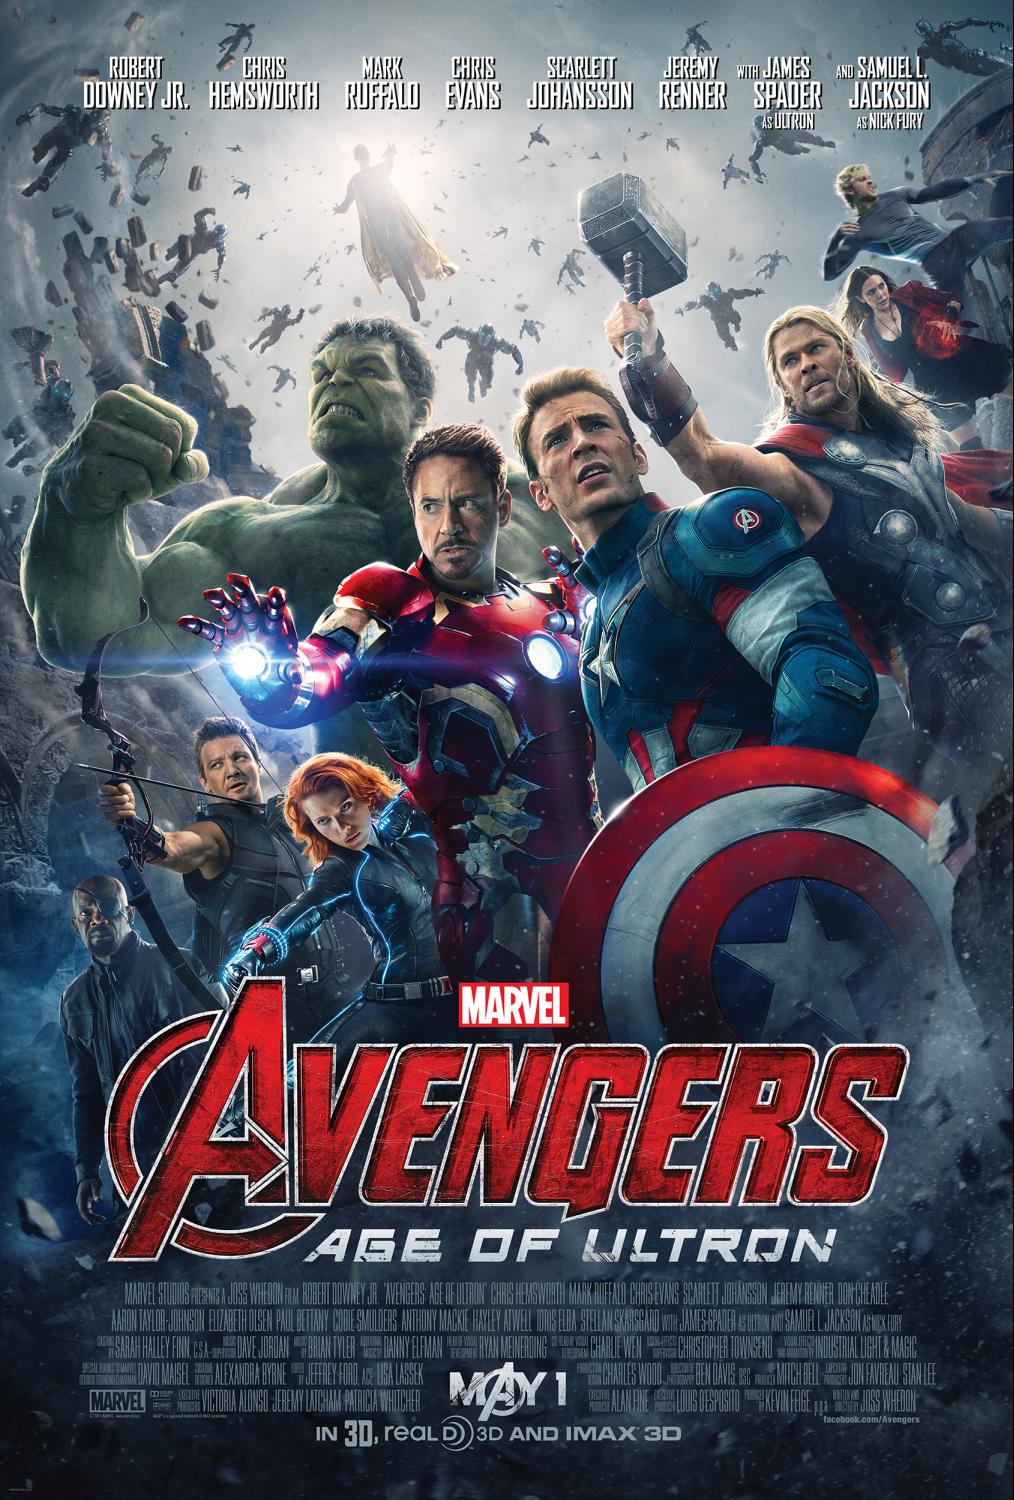 New Avengers: Age of Ultron Trailer and Posters #AgeofUltron